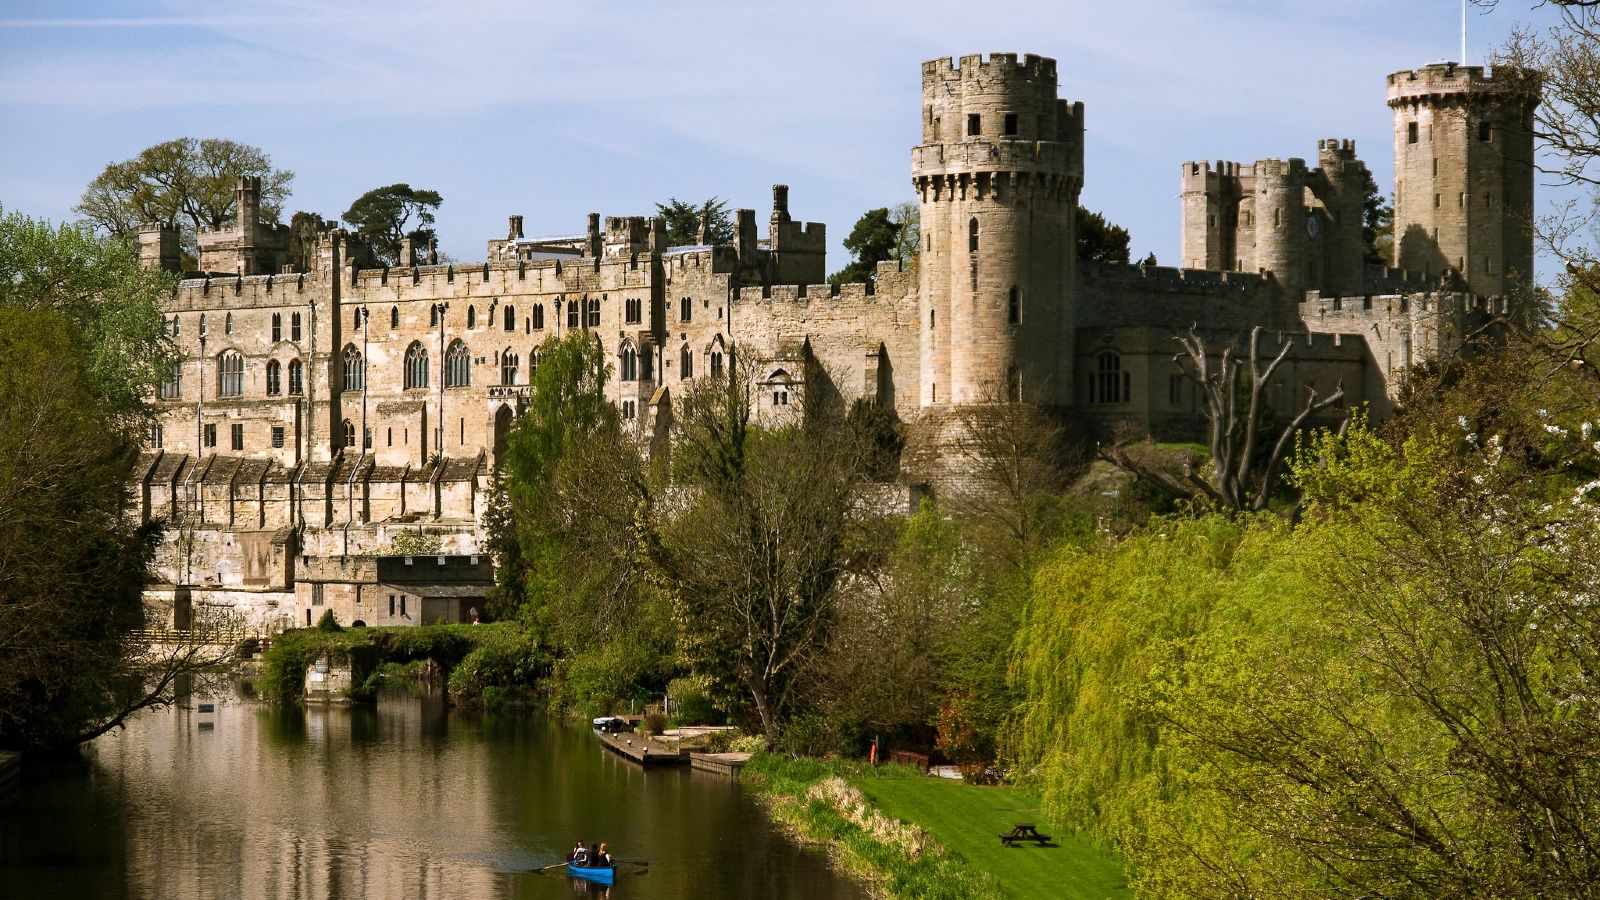 <p>                     <strong>Location:</strong> Warwick, CV34 4QU| <strong>Website:</strong> warwick-castle.com                   </p>                                      <p>                     On the banks of the winding Avon sits the towering medieval fortress of Warwick Castle. With a history dating back 1,000 years, the Midlands site was first home to a wooden fort built by William the Conqueror and was redesigned with stone ramparts and portcullis during the 12th century.                    </p>                                      <p>                     Today, the castle’s medieval history has been brought vividly to life, and kids will love exploring the Horrible Histories Maze, castle dungeons, replica trebuchet, and impressive archery exhibition. There’s even medieval-themed glamping—perfect for a family getaway on site.                   </p>